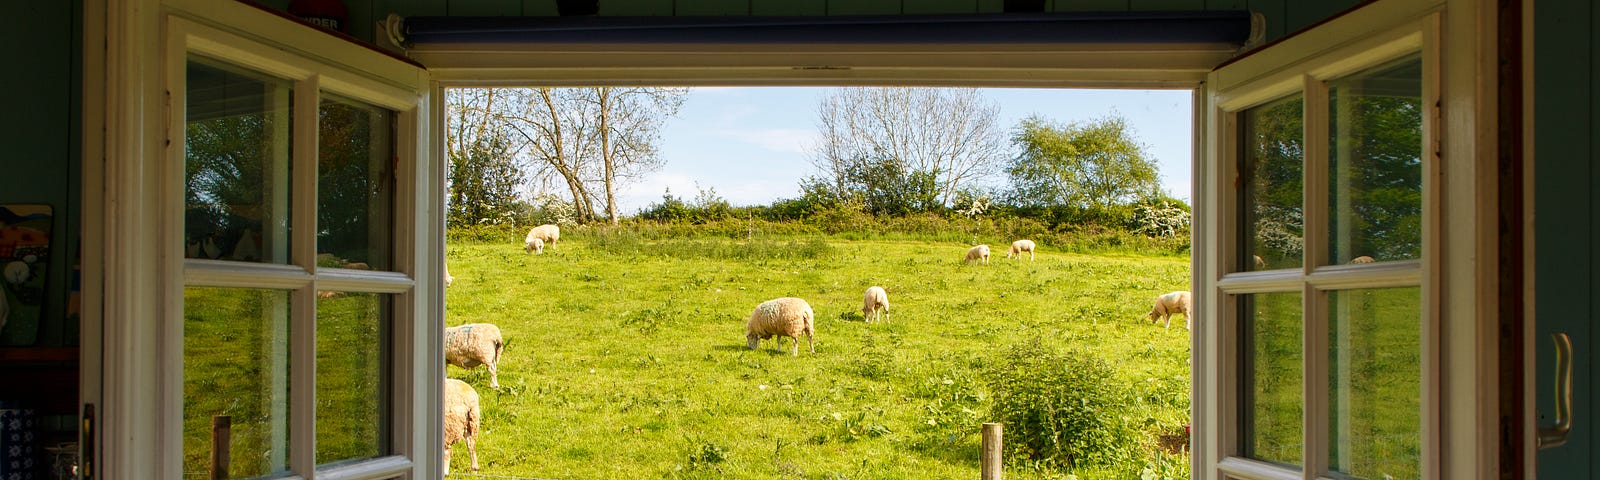 An open window looking out onto a grassy field filled with sheep.